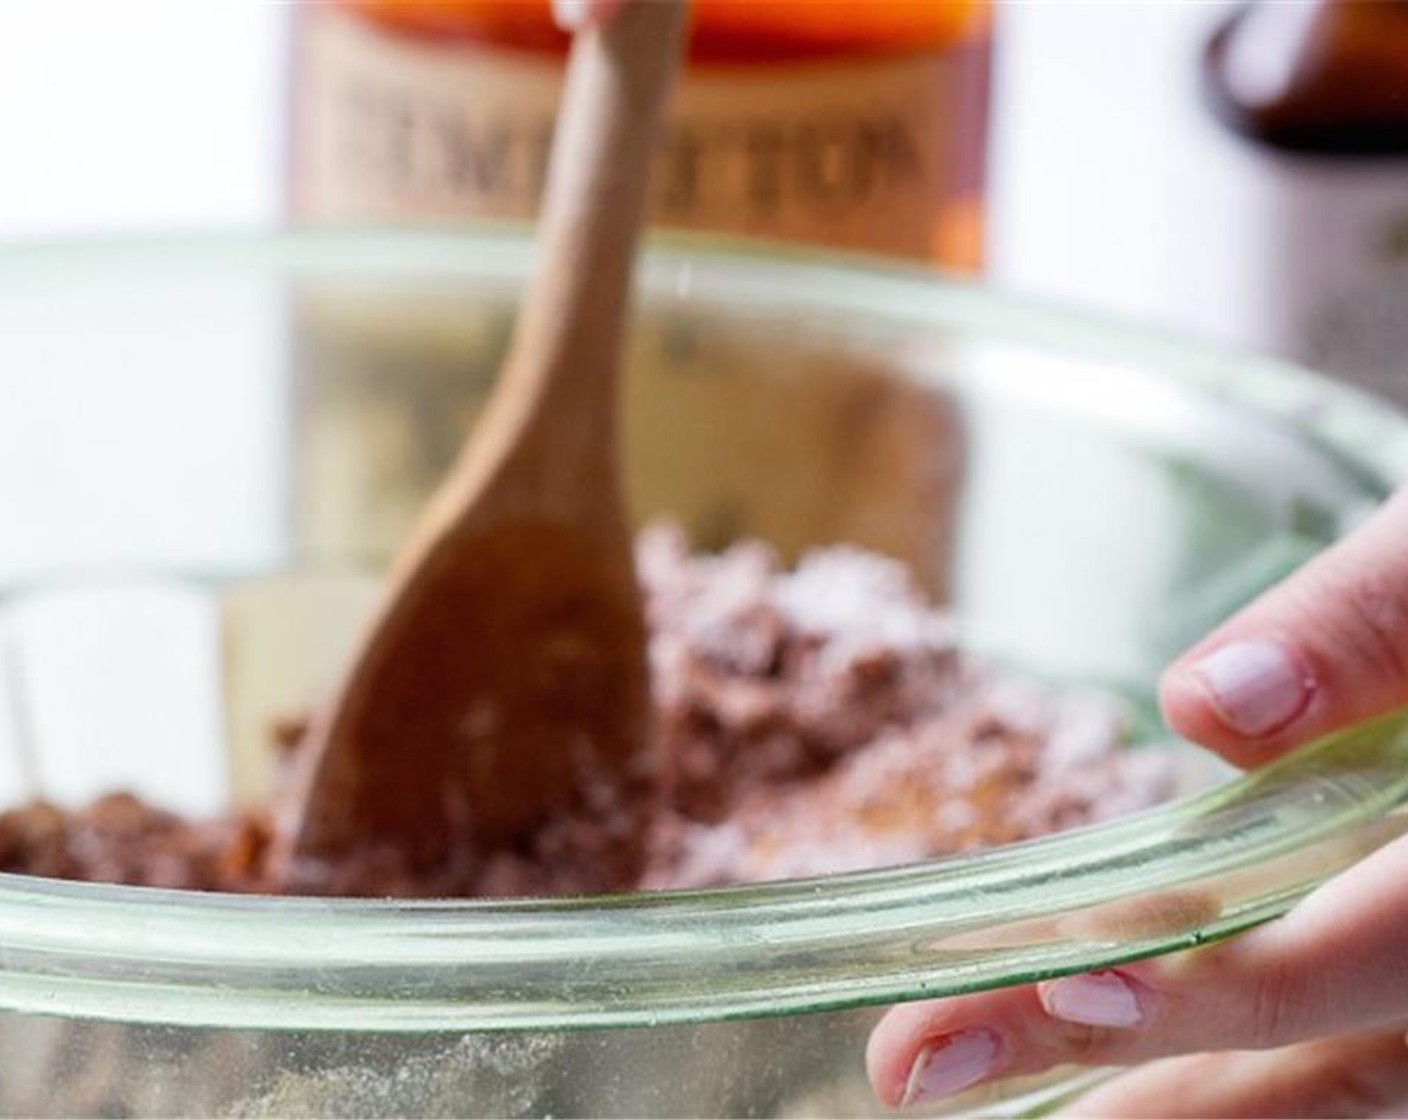 step 2 In a medium sized bowl, mix together the ground ginger cookies, Unsweetened Cocoa Powder (1/4 cup), Templeton® Rye Whiskey (1/4 cup),Butter (2 Tbsp), Powdered Confectioners Sugar (1 cup) and Vanilla Extract (1 tsp).